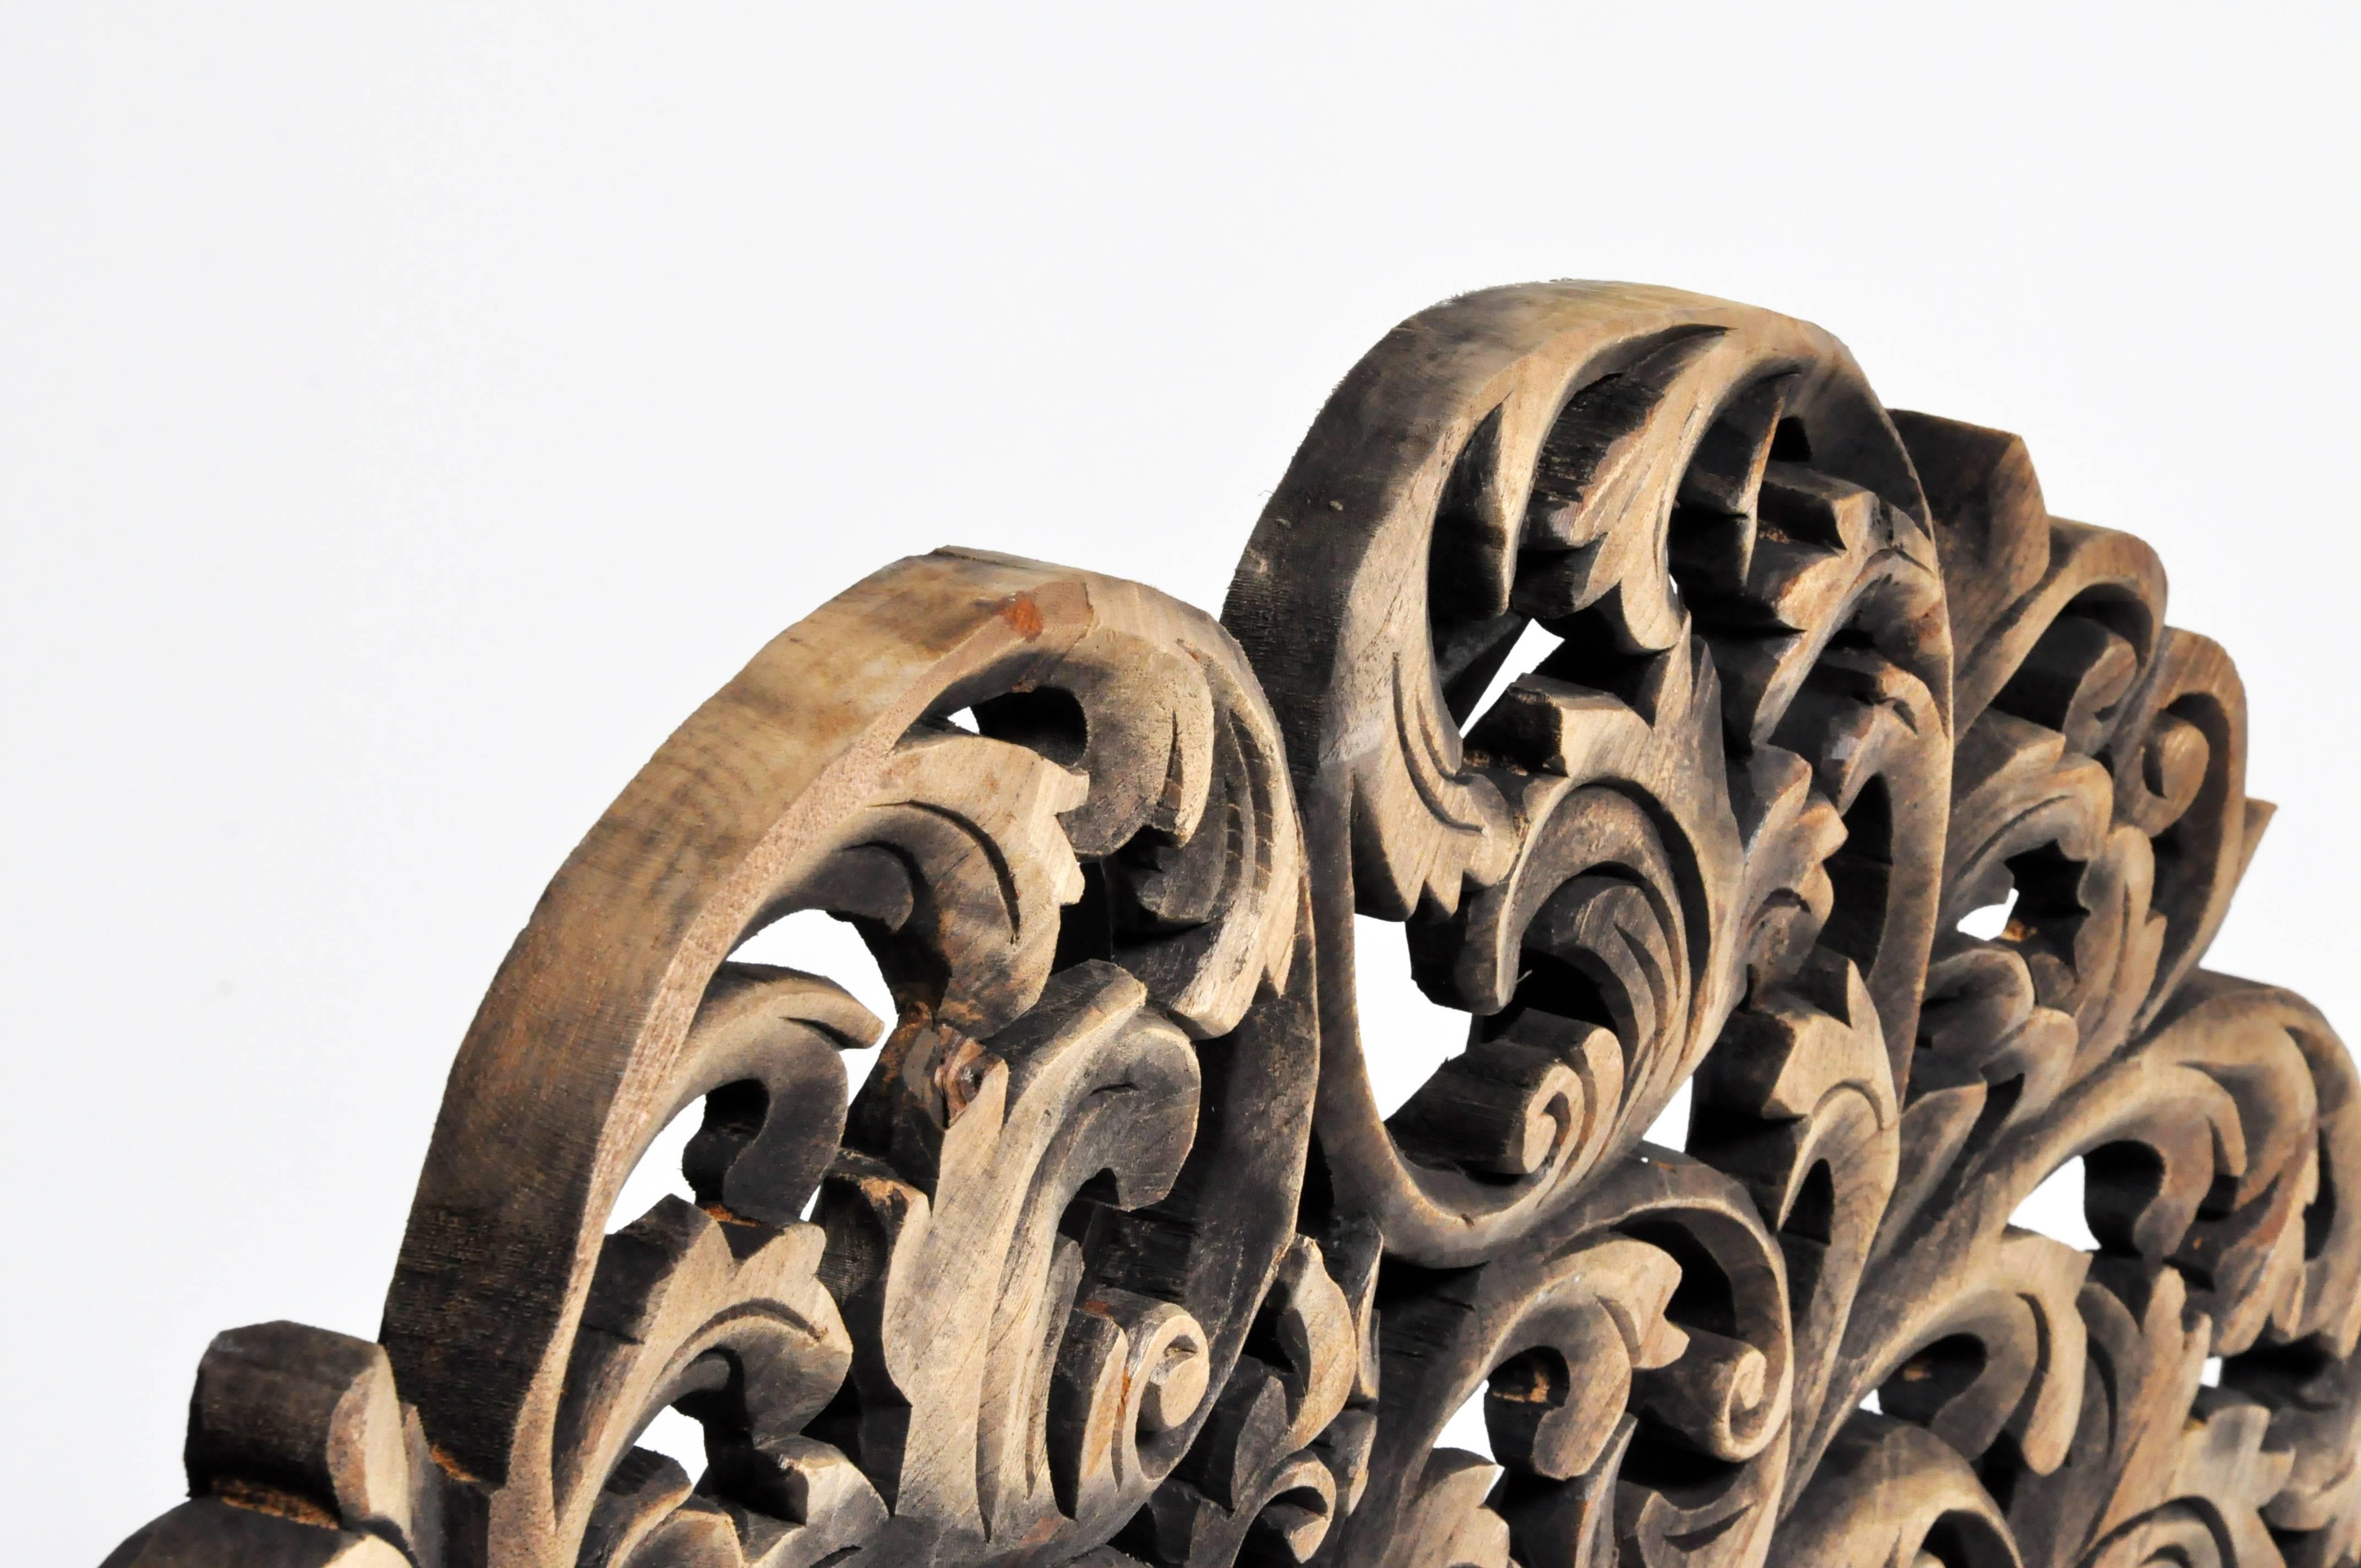 Southeast Asian Round Flower Wood Carving 4